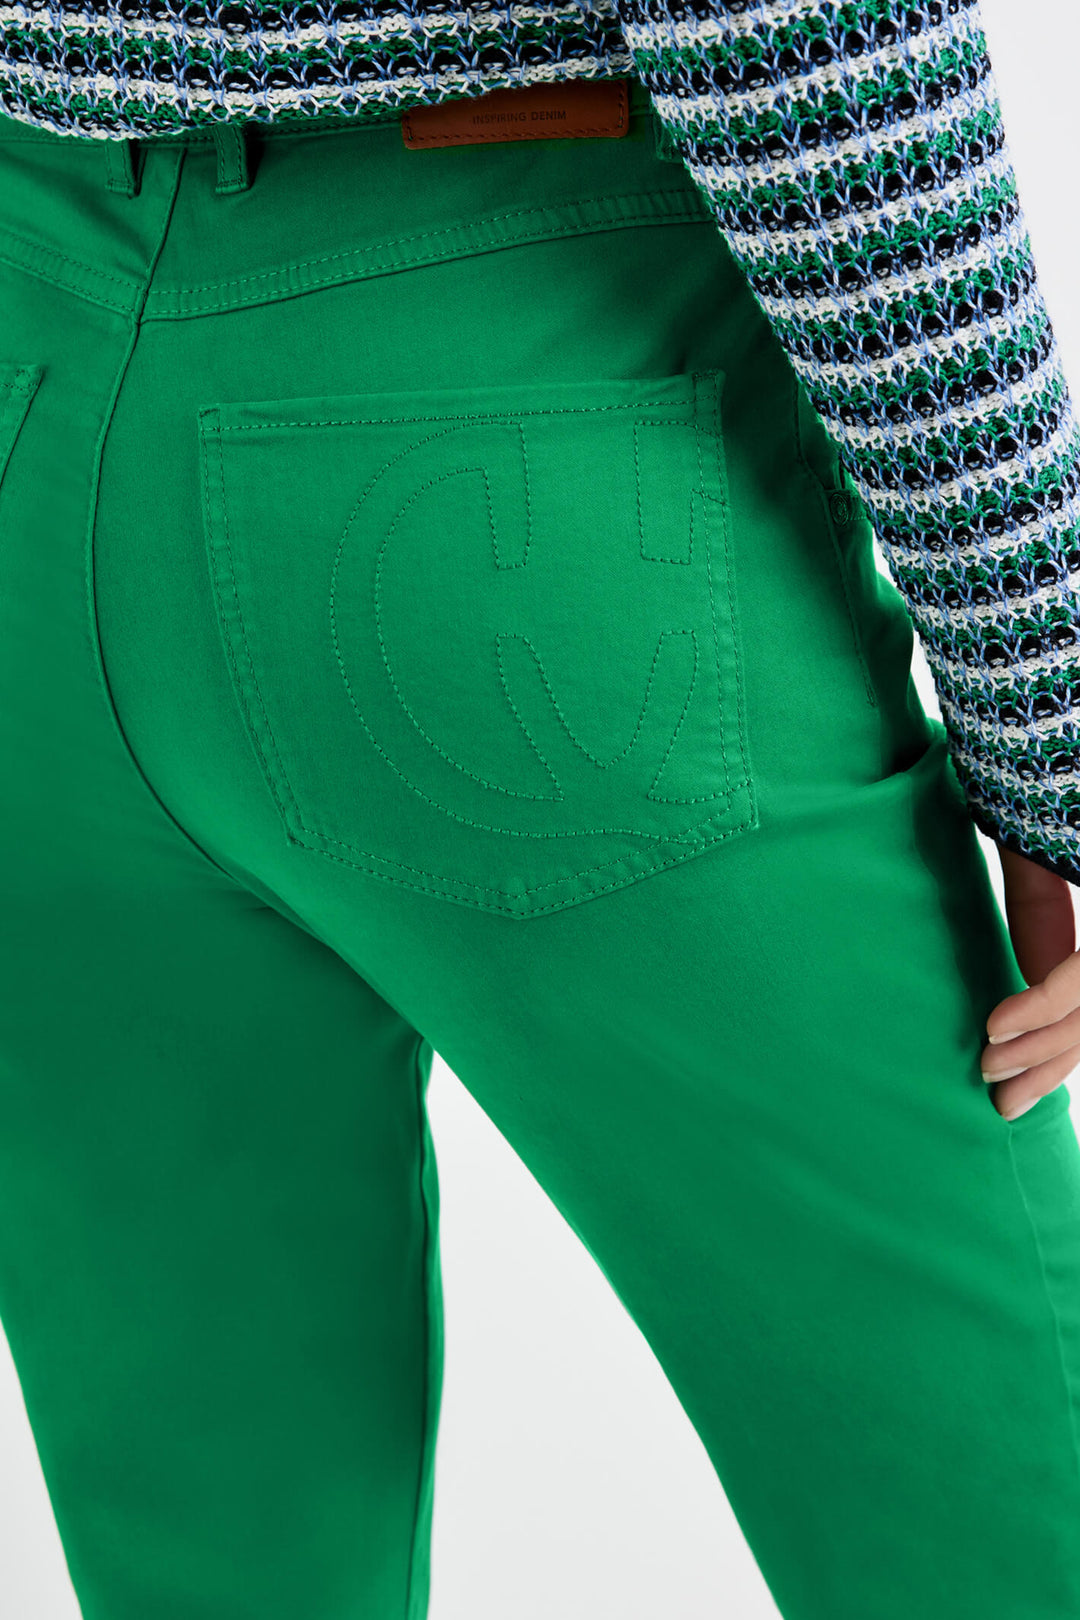 Gerry Weber 120001 Vibrant Green Jeans - Experience Boutique